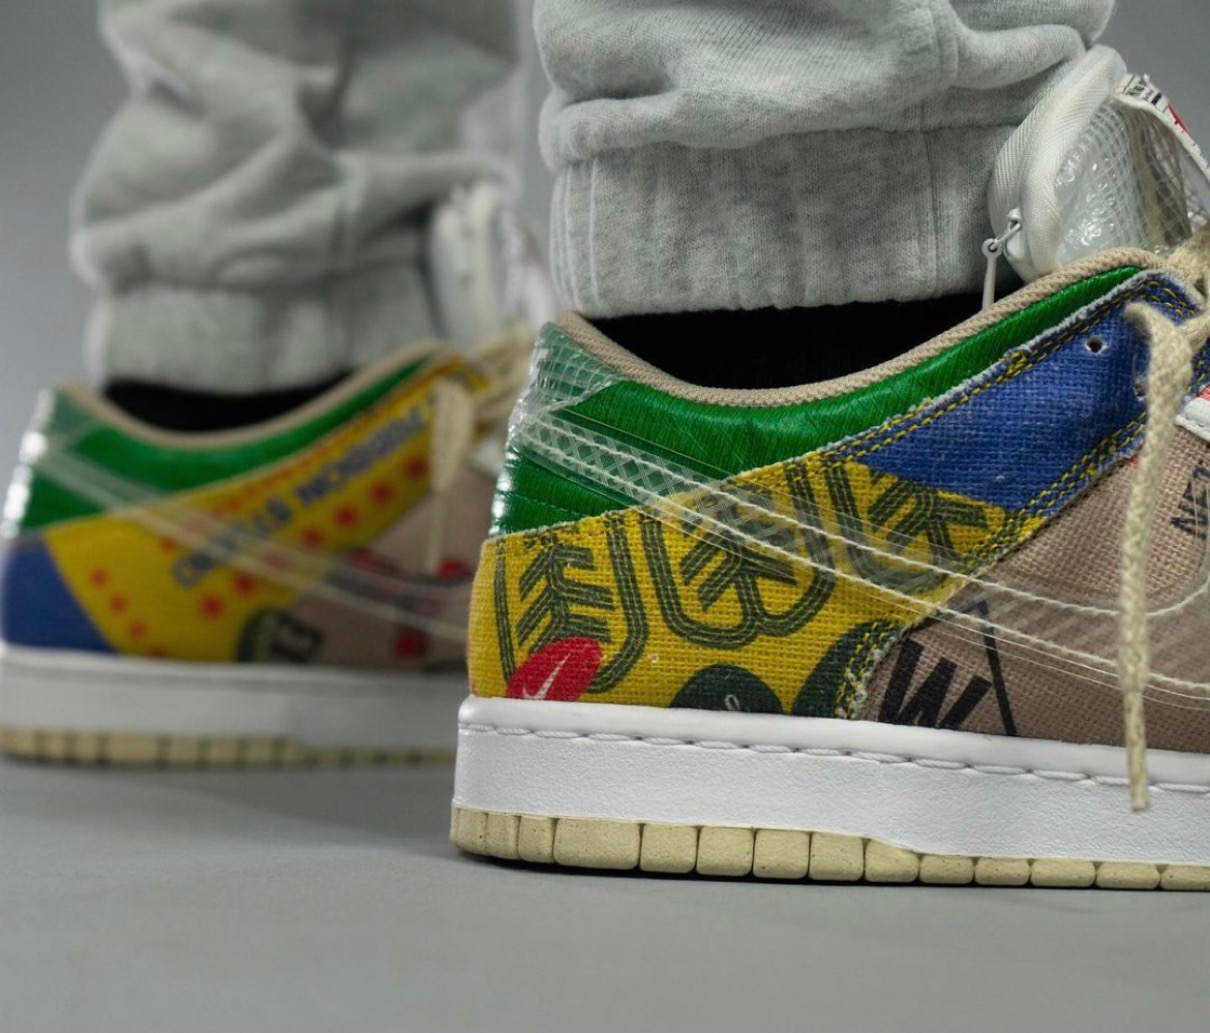 Nike】Dunk Low SP “City Market”が国内3月4日に発売予定 | UP TO DATE